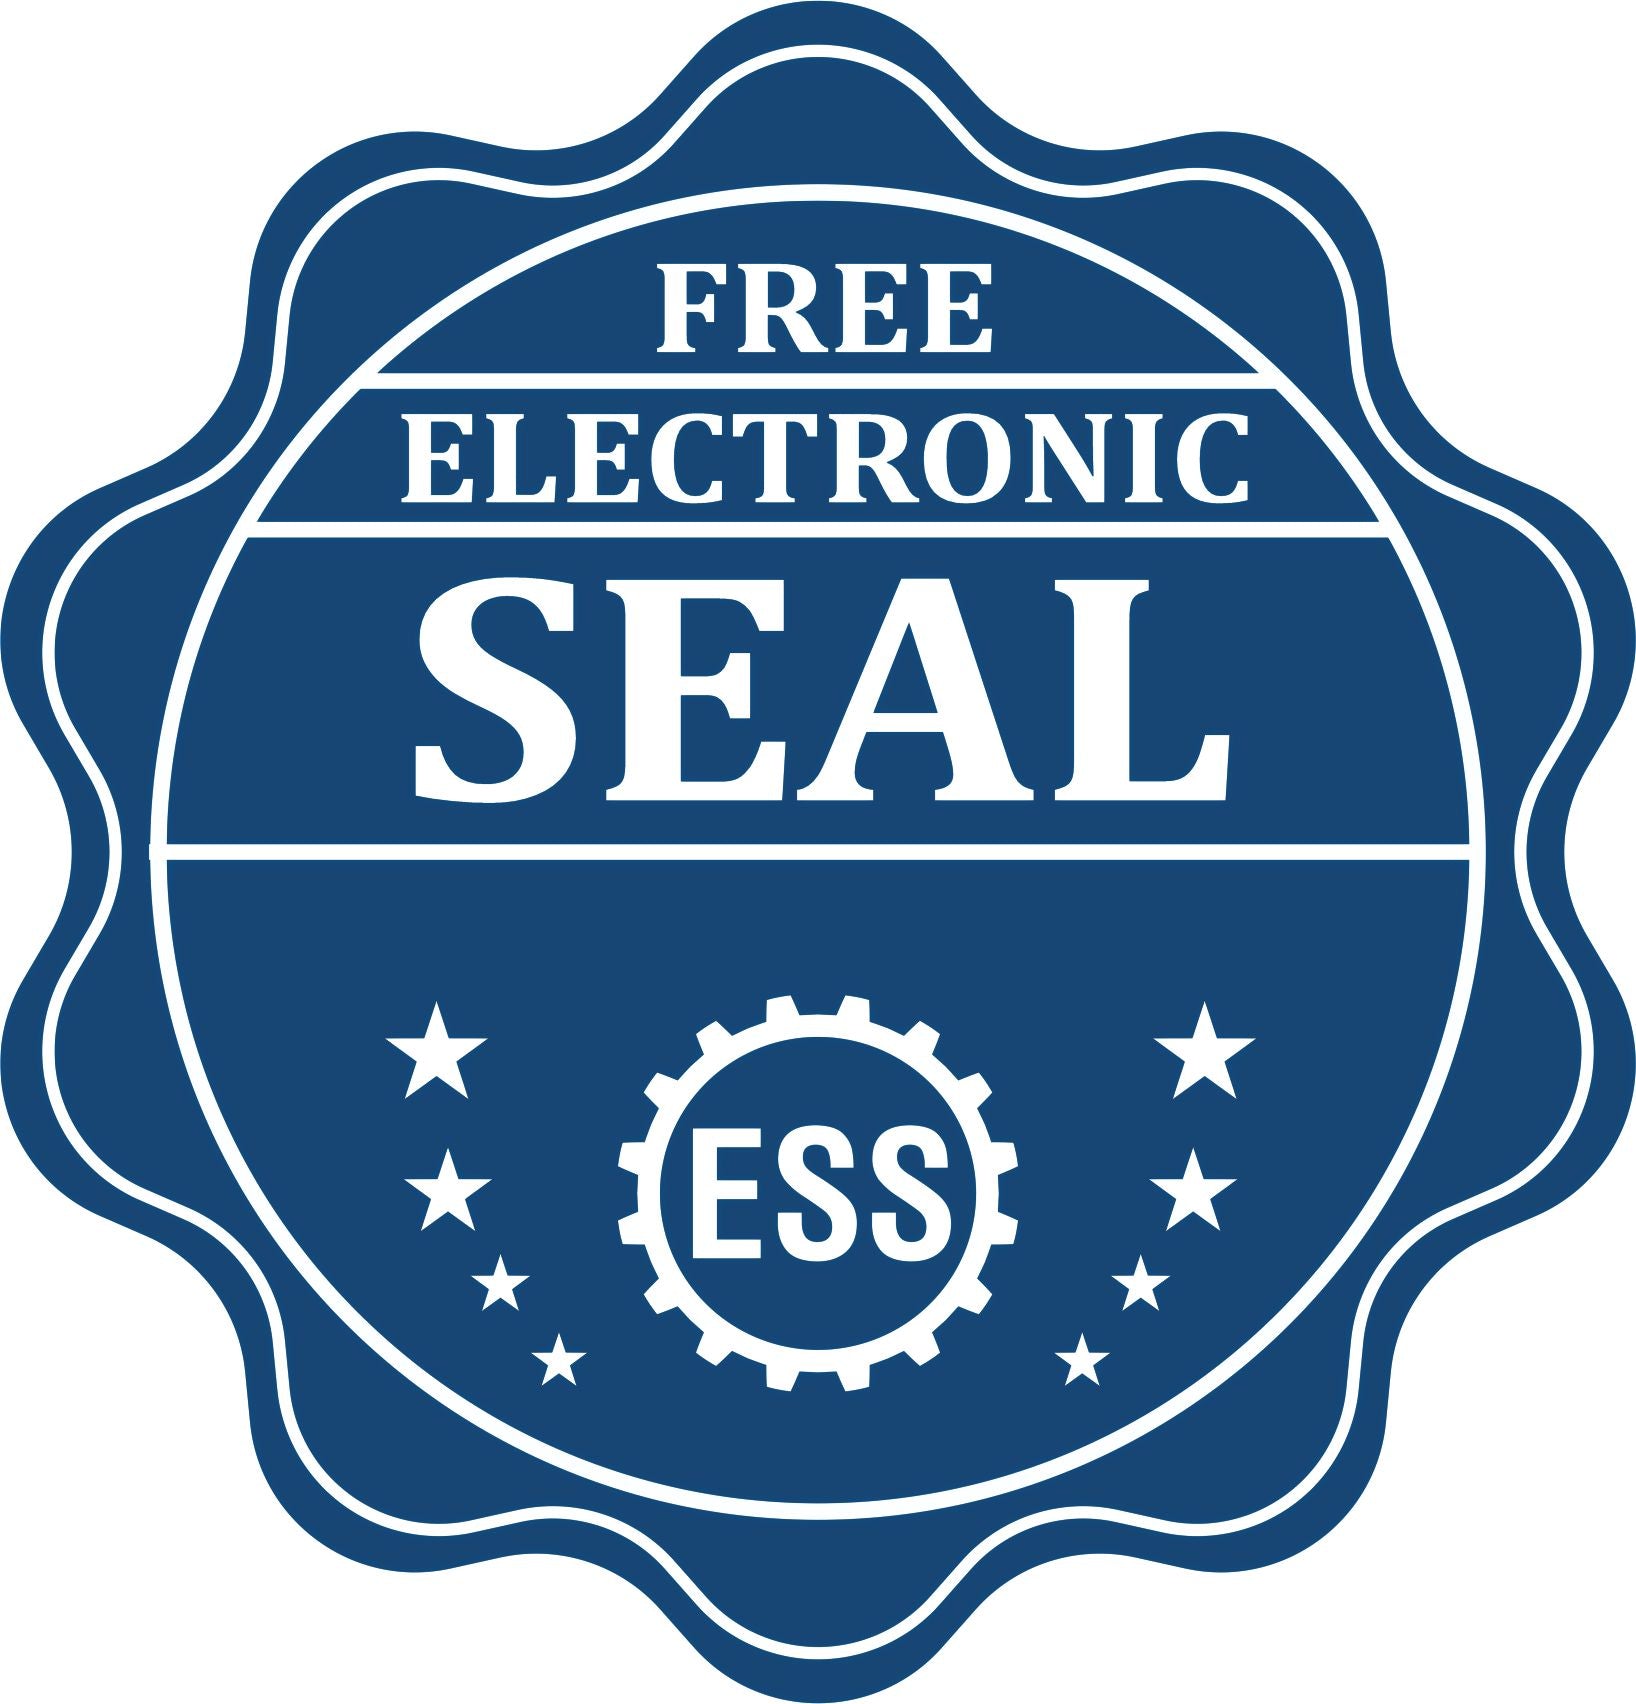 A badge showing a free electronic seal for the Soft Wisconsin Professional Engineer Seal with stars and the ESS gear on the emblem.